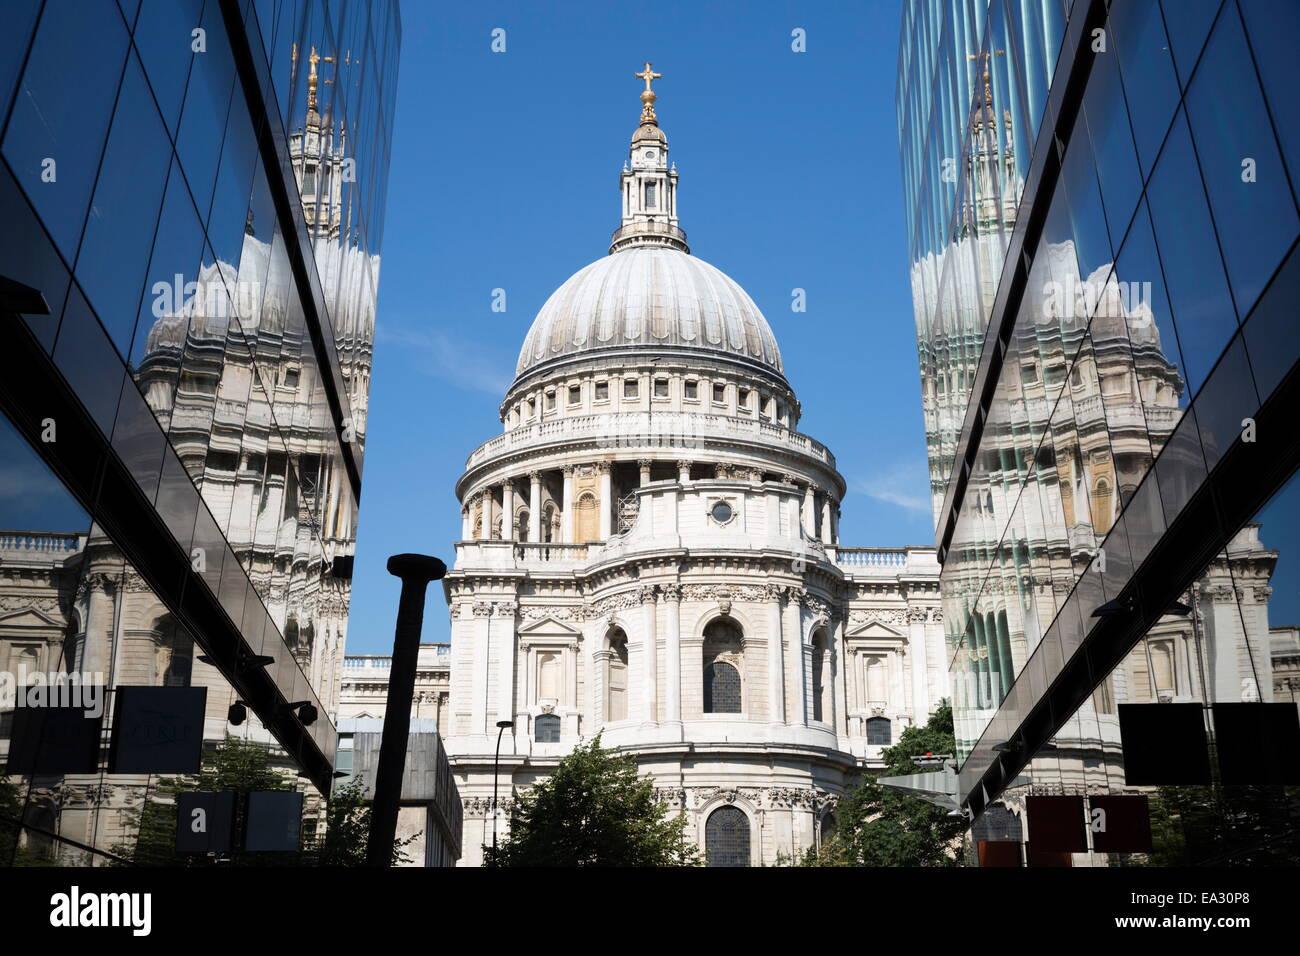 Dome of St. Paul's Cathedral reflected in office windows, London, England, United Kingdom, Europe Stock Photo